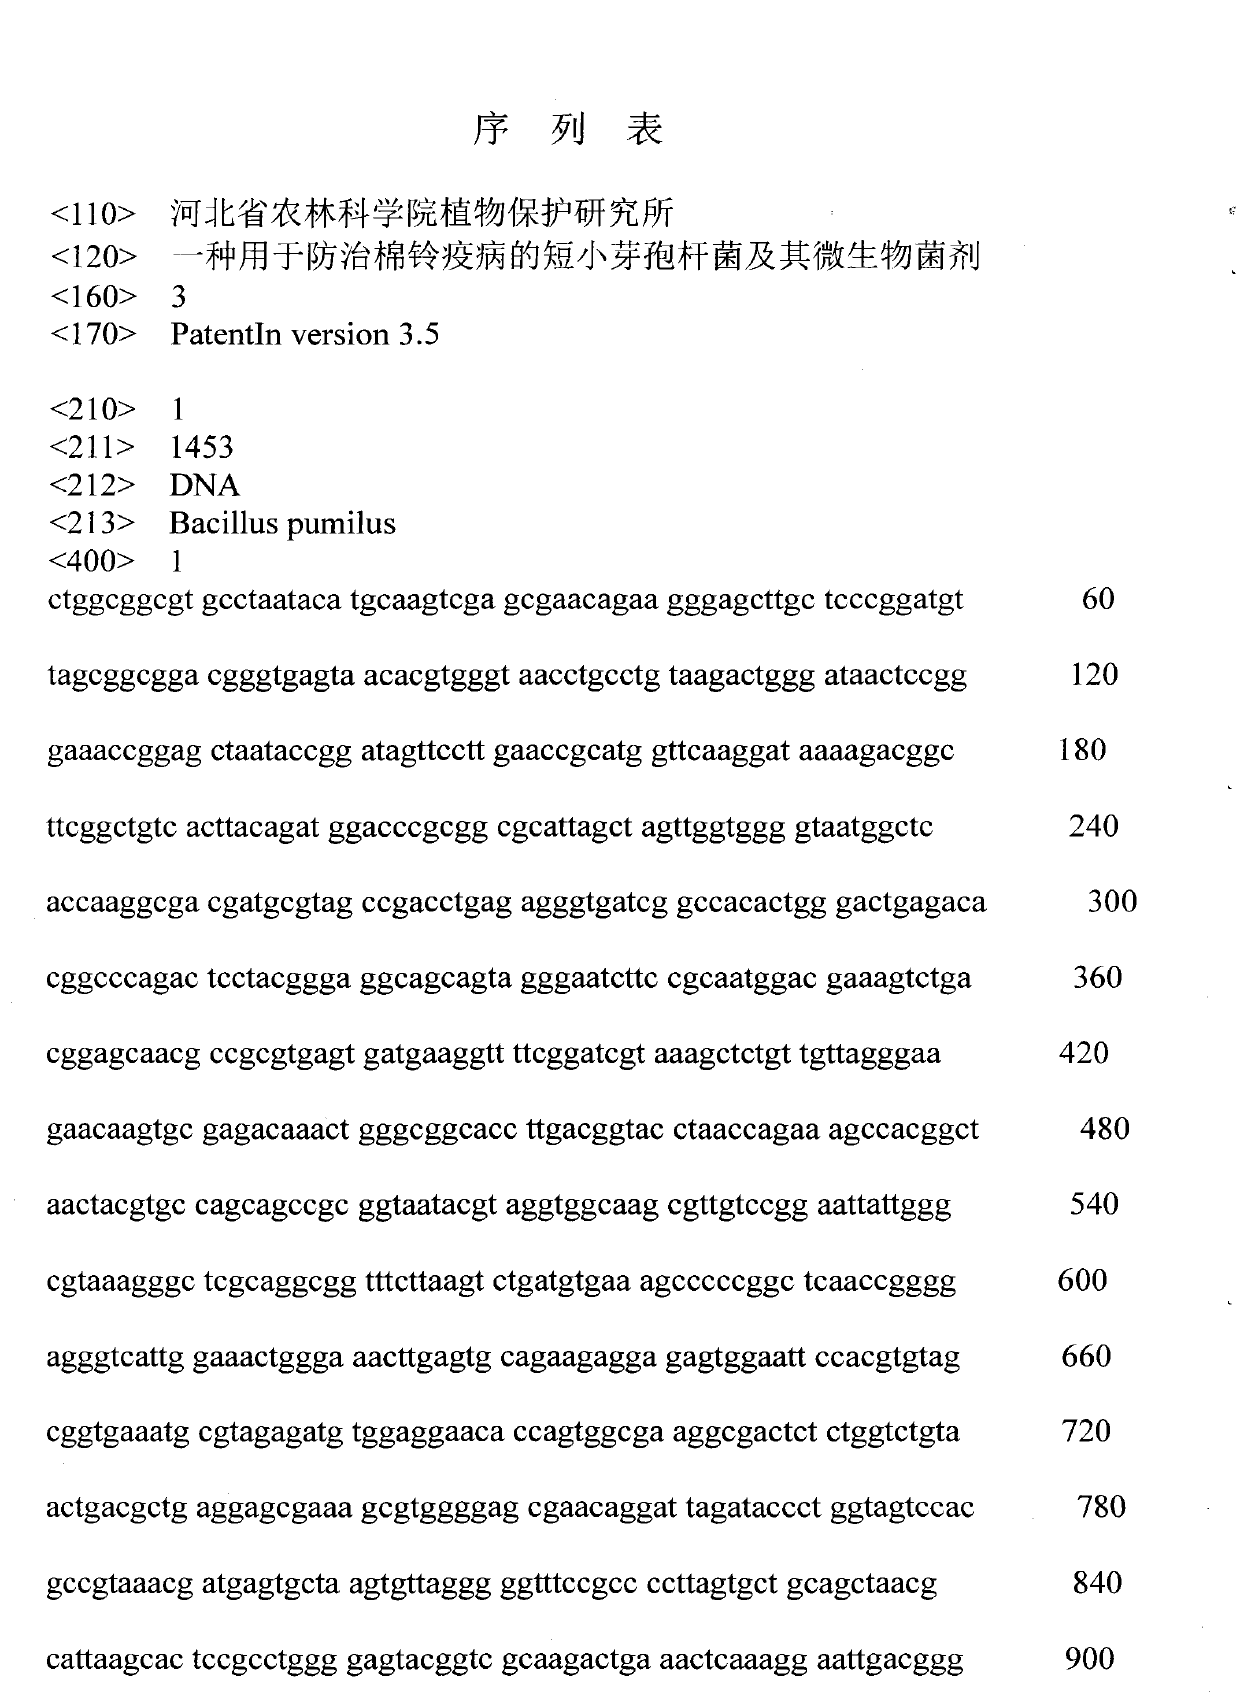 Bacillus pumilus for controlling cottonbollblight and microorganism bacterium agent thereof